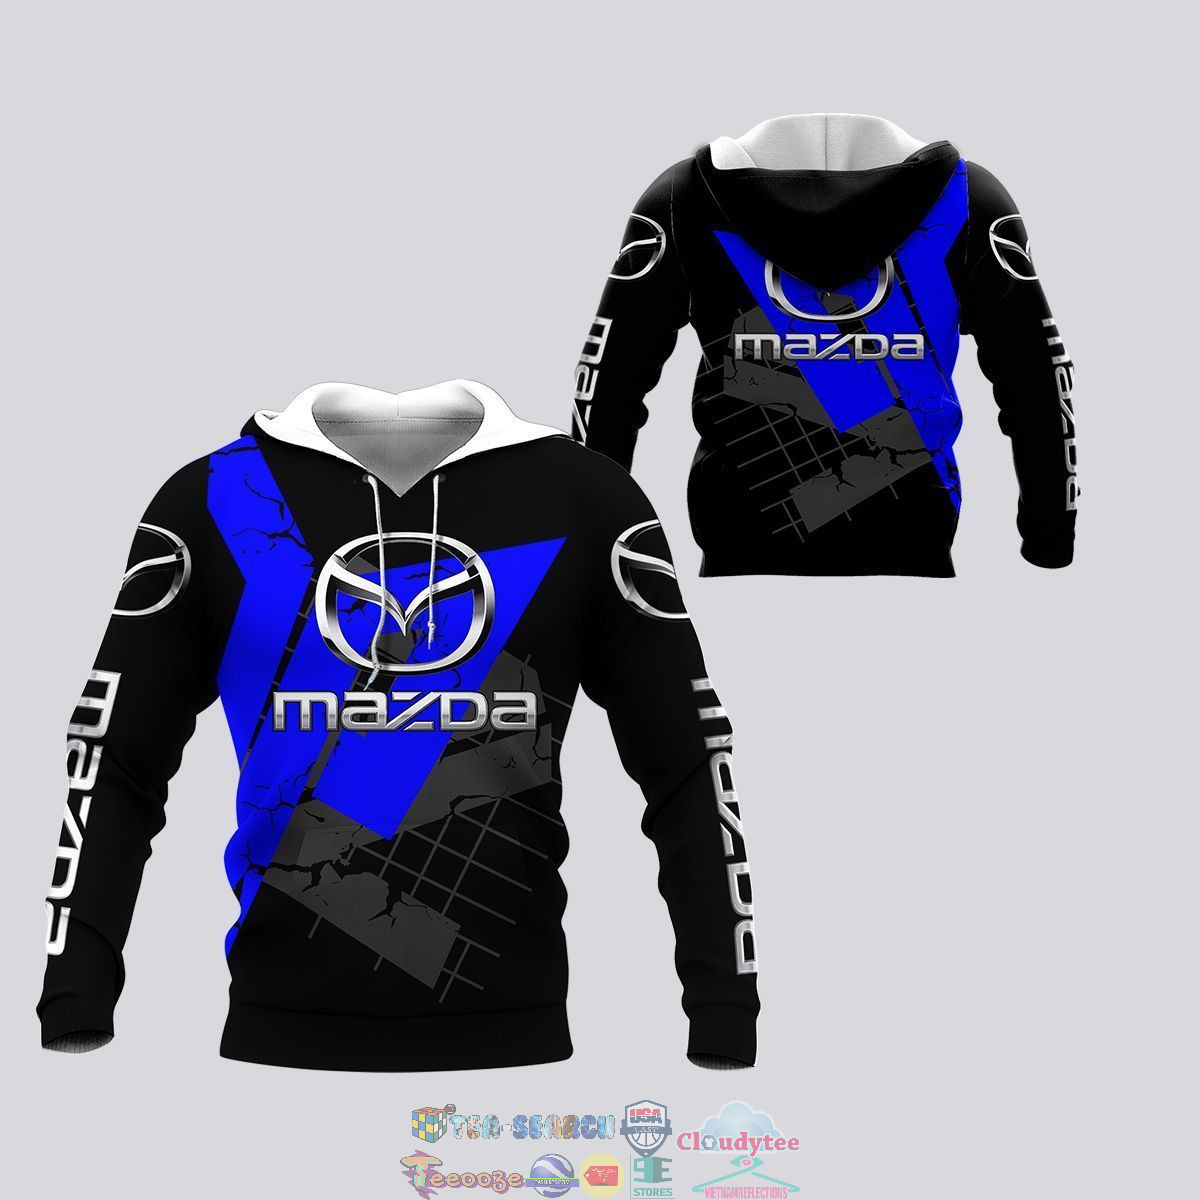 Mazda ver 14 3D hoodie and t-shirt